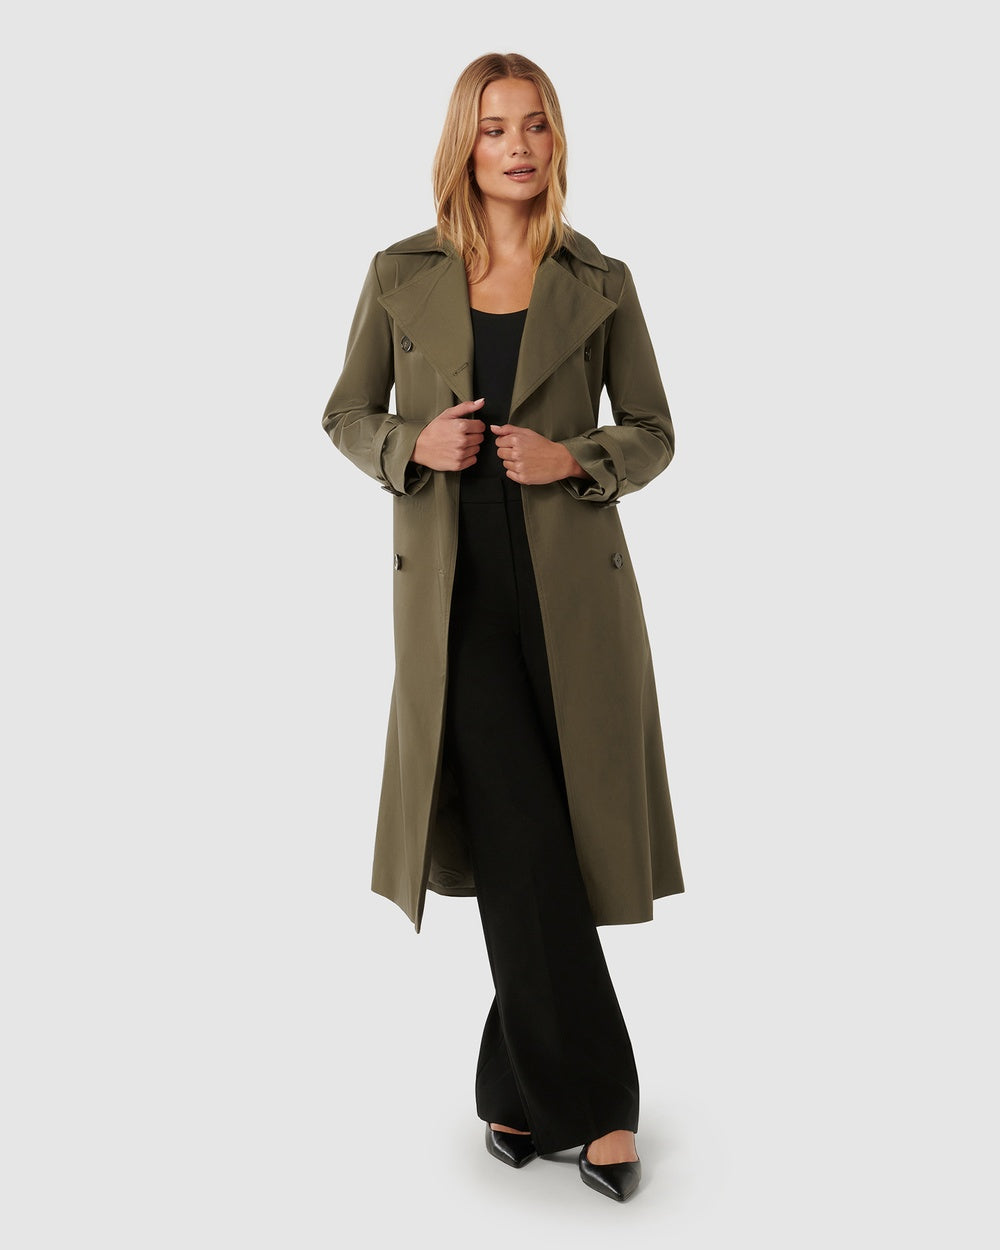 Classic and soft trench coat